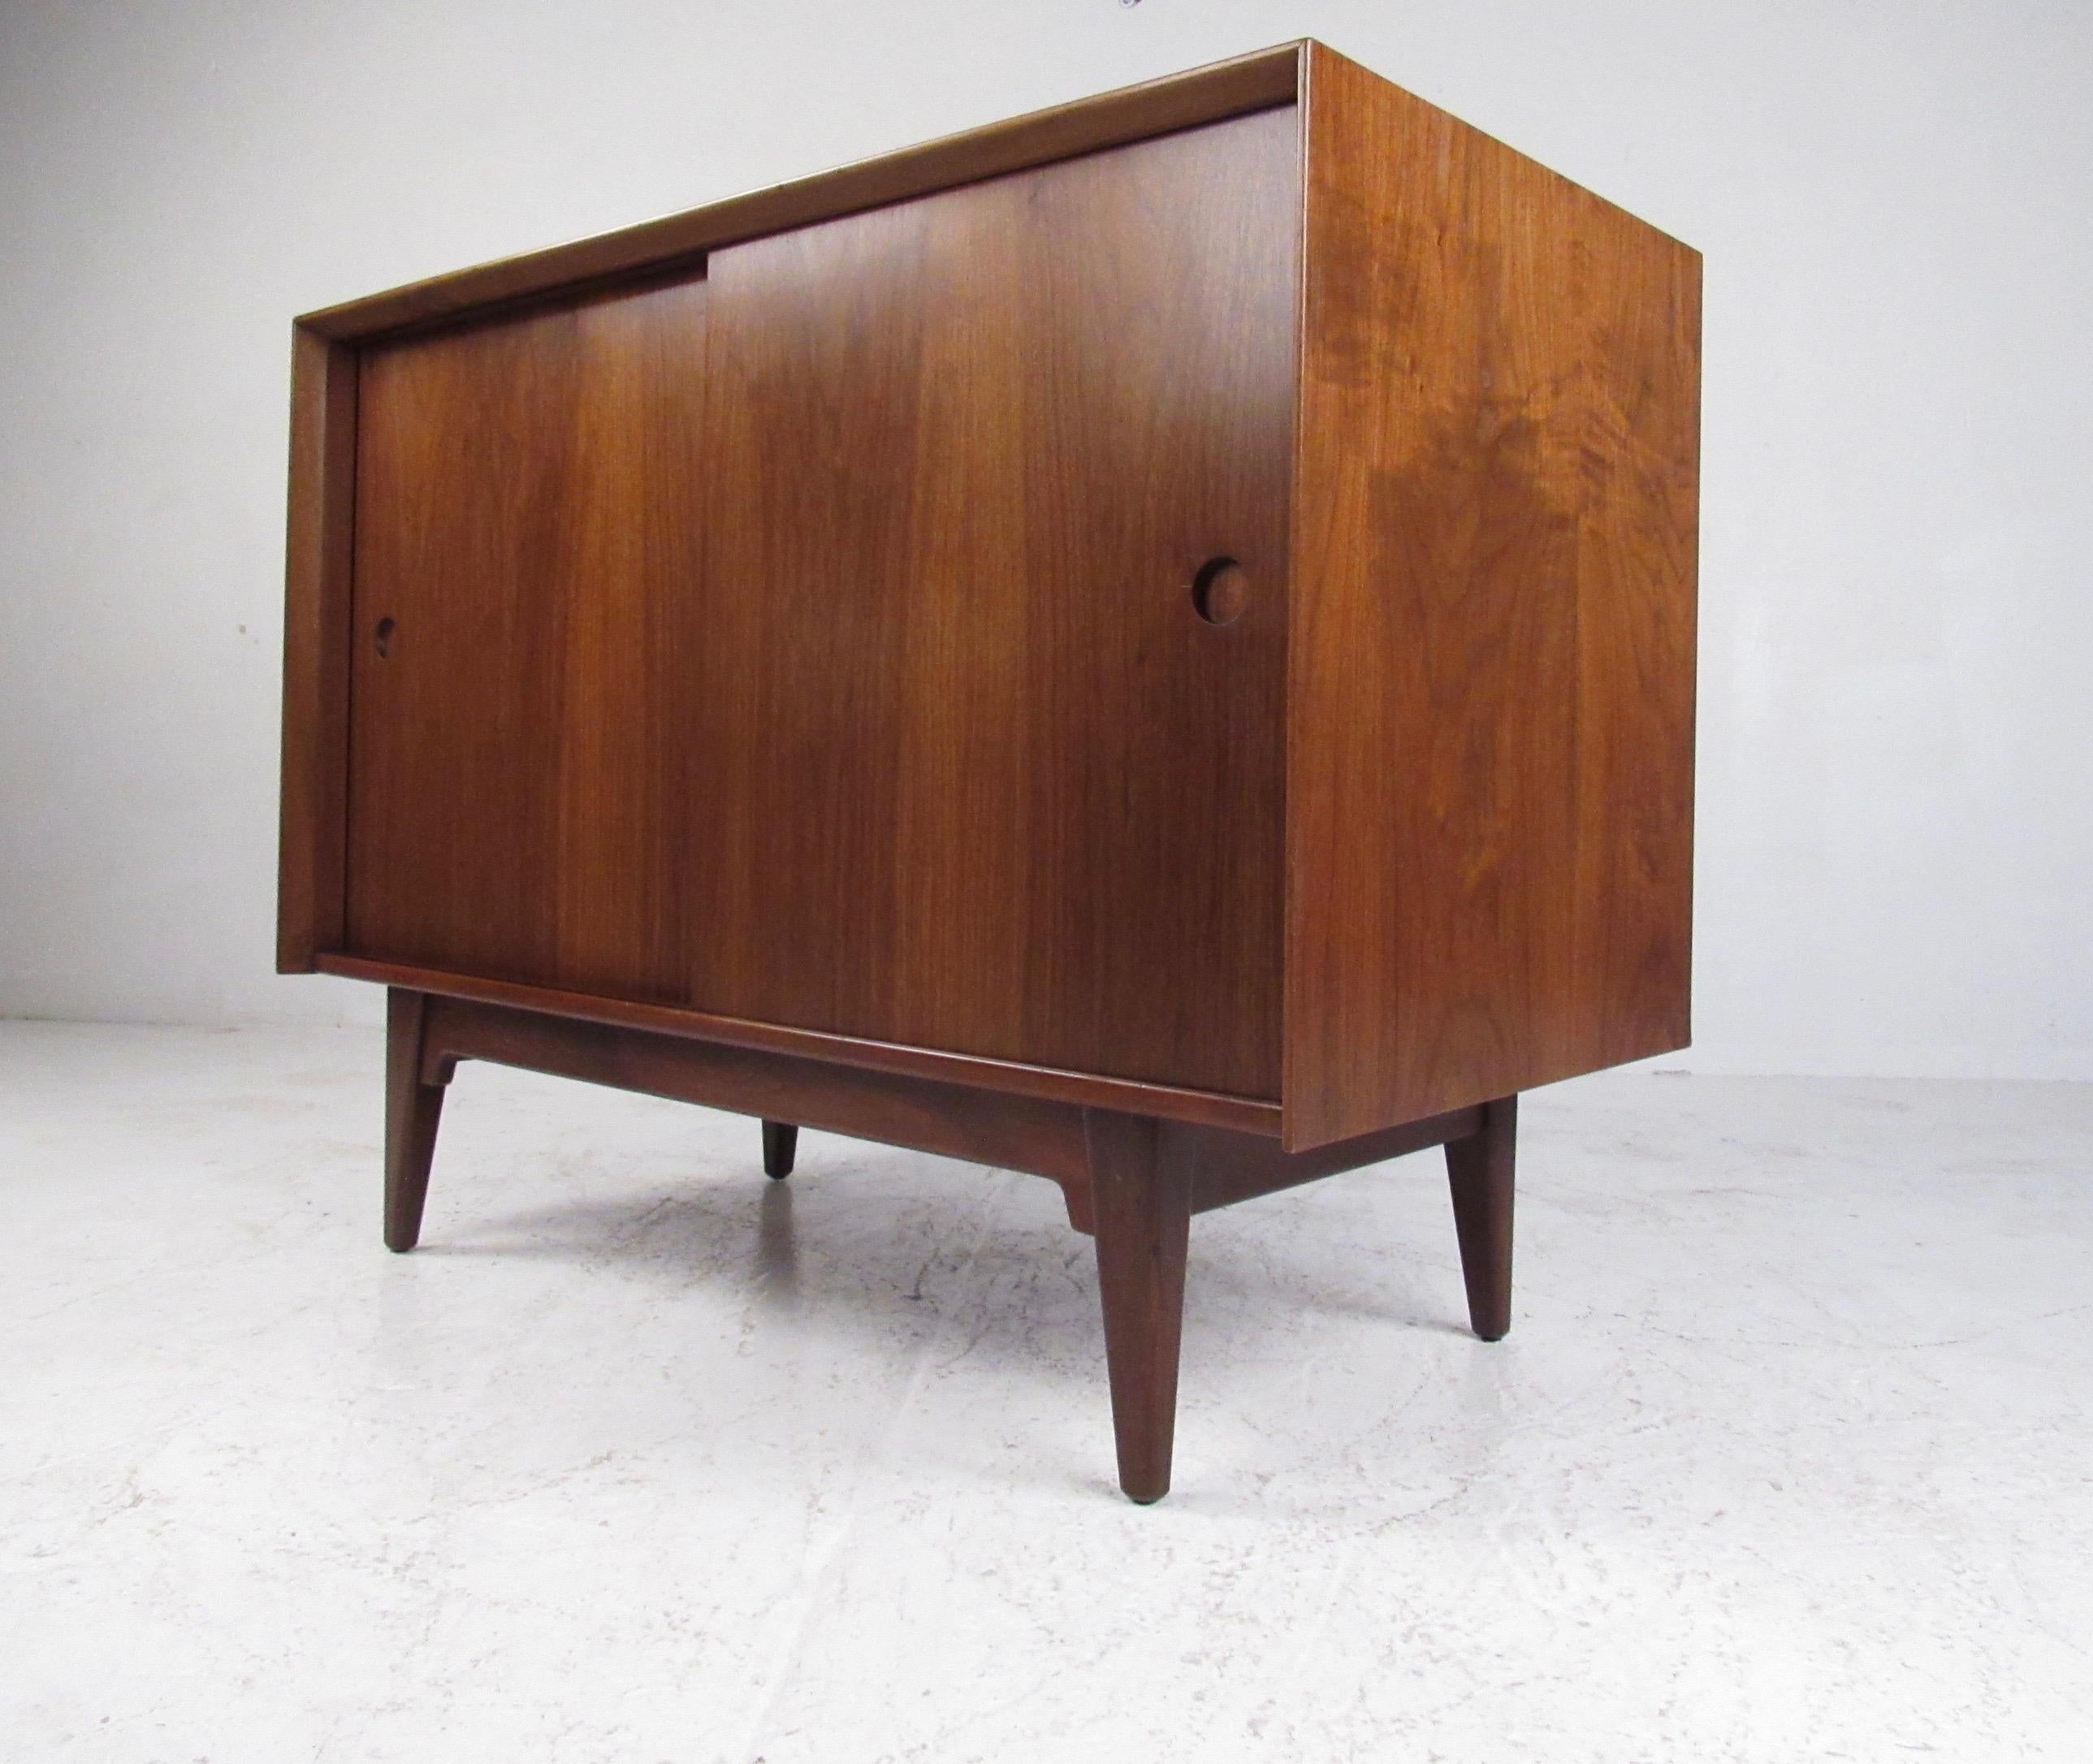 This petite Mid-Century Modern credenza features rich walnut finish and sturdy construction. Spacious interior cabinet features adjustable shelves offering versatile storage space in a stylish vintage credenza. Ideal piece for office storage or use